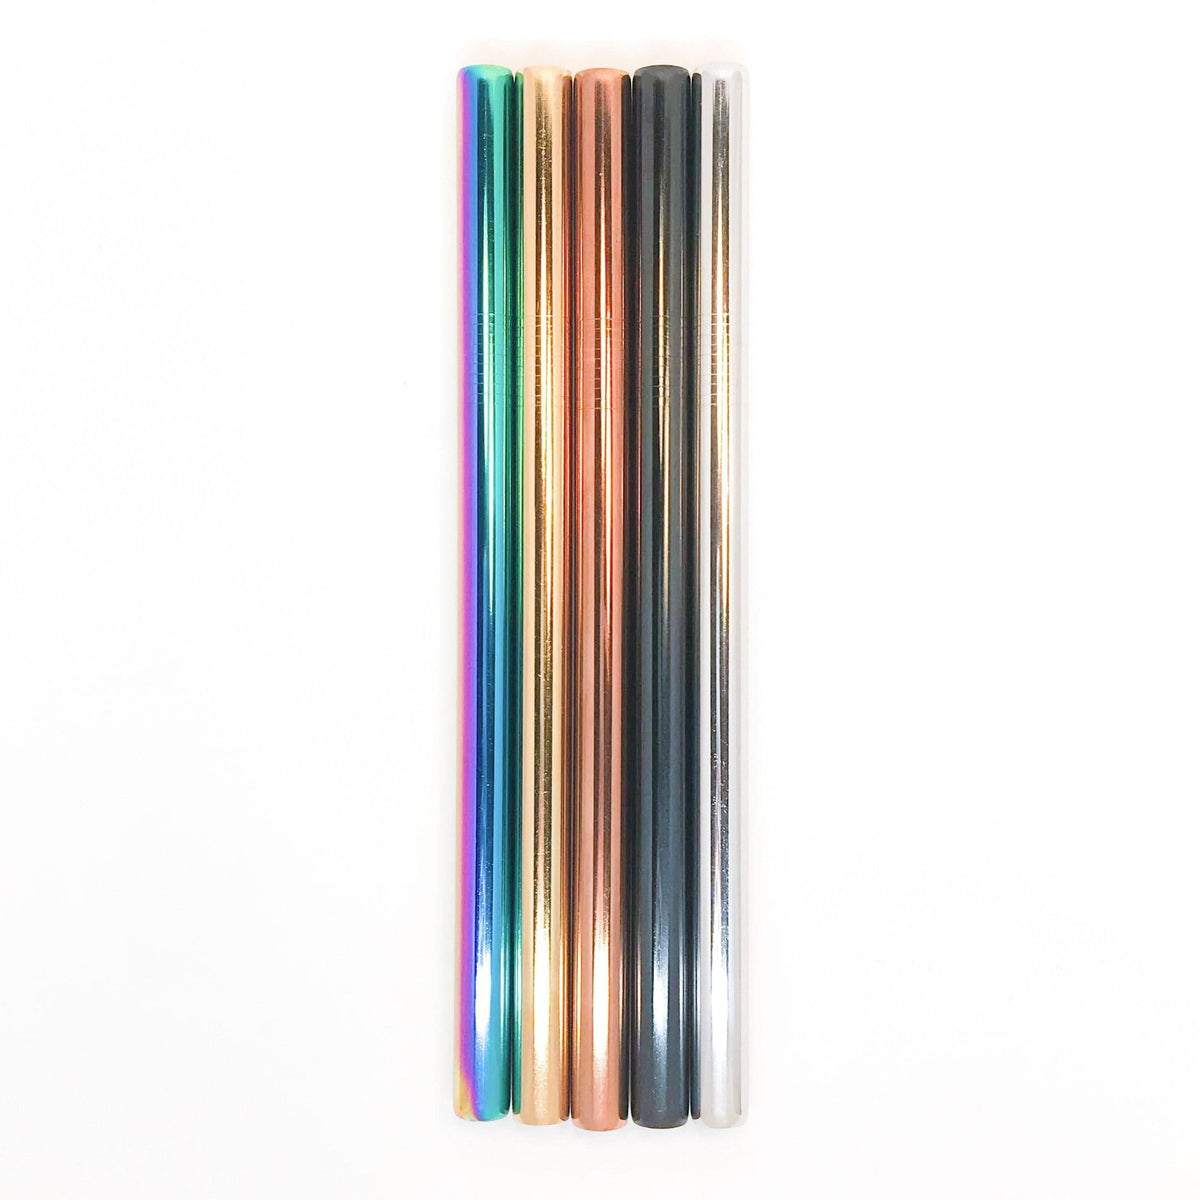 8.5 inch stainless steel reusable bubble tea straw in five different colors